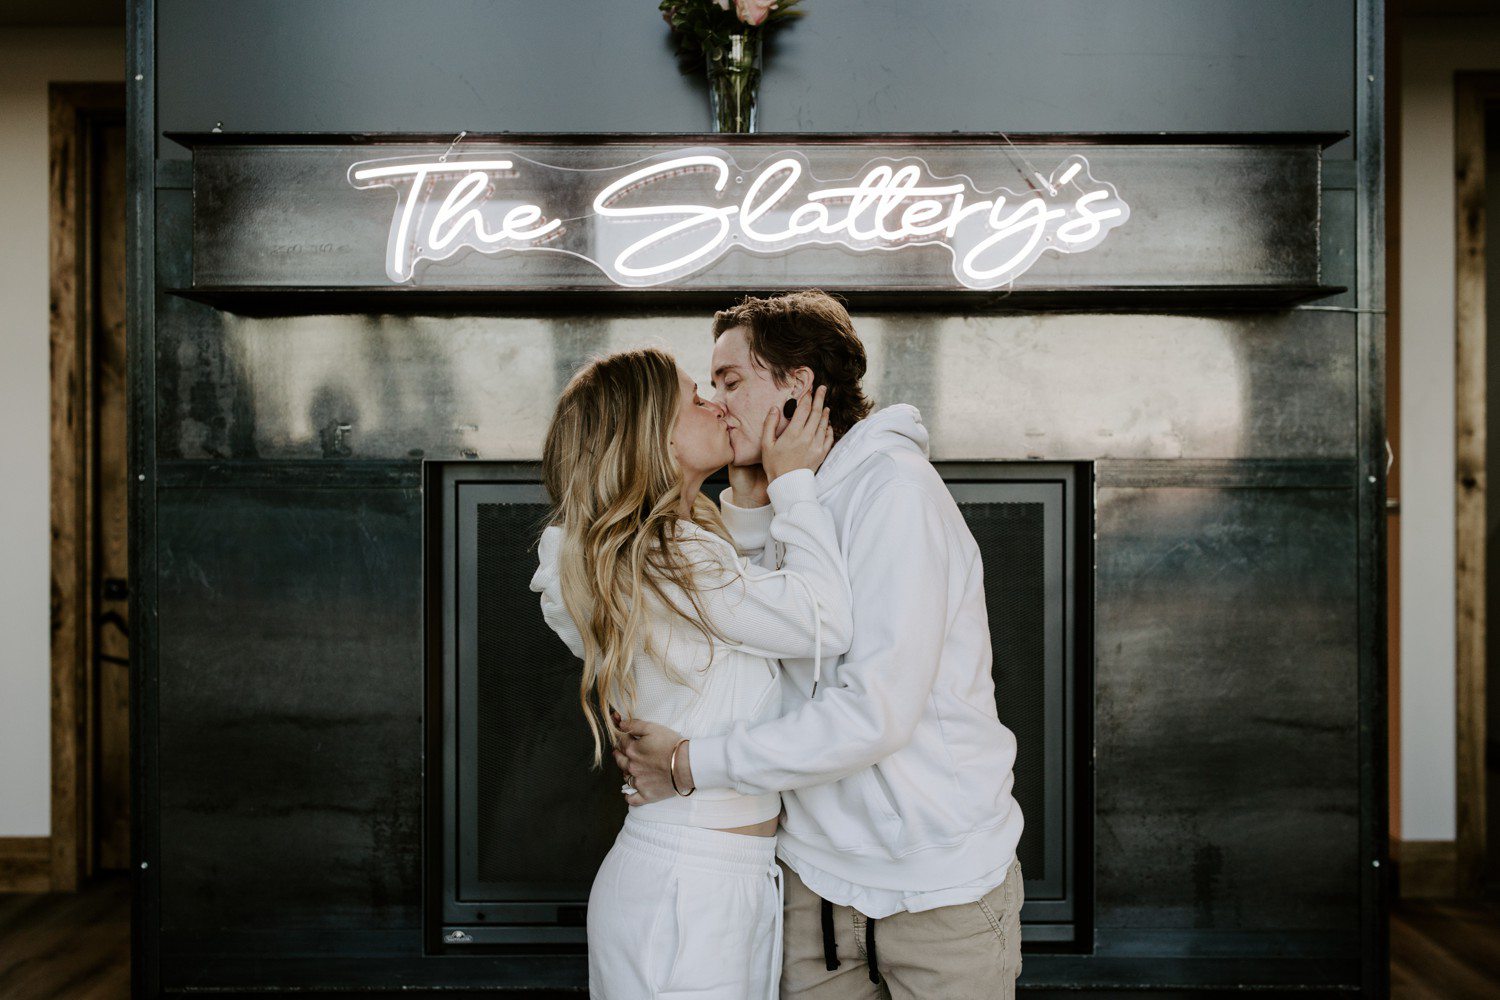 Wedding photos in front of neon sign with couples last name.